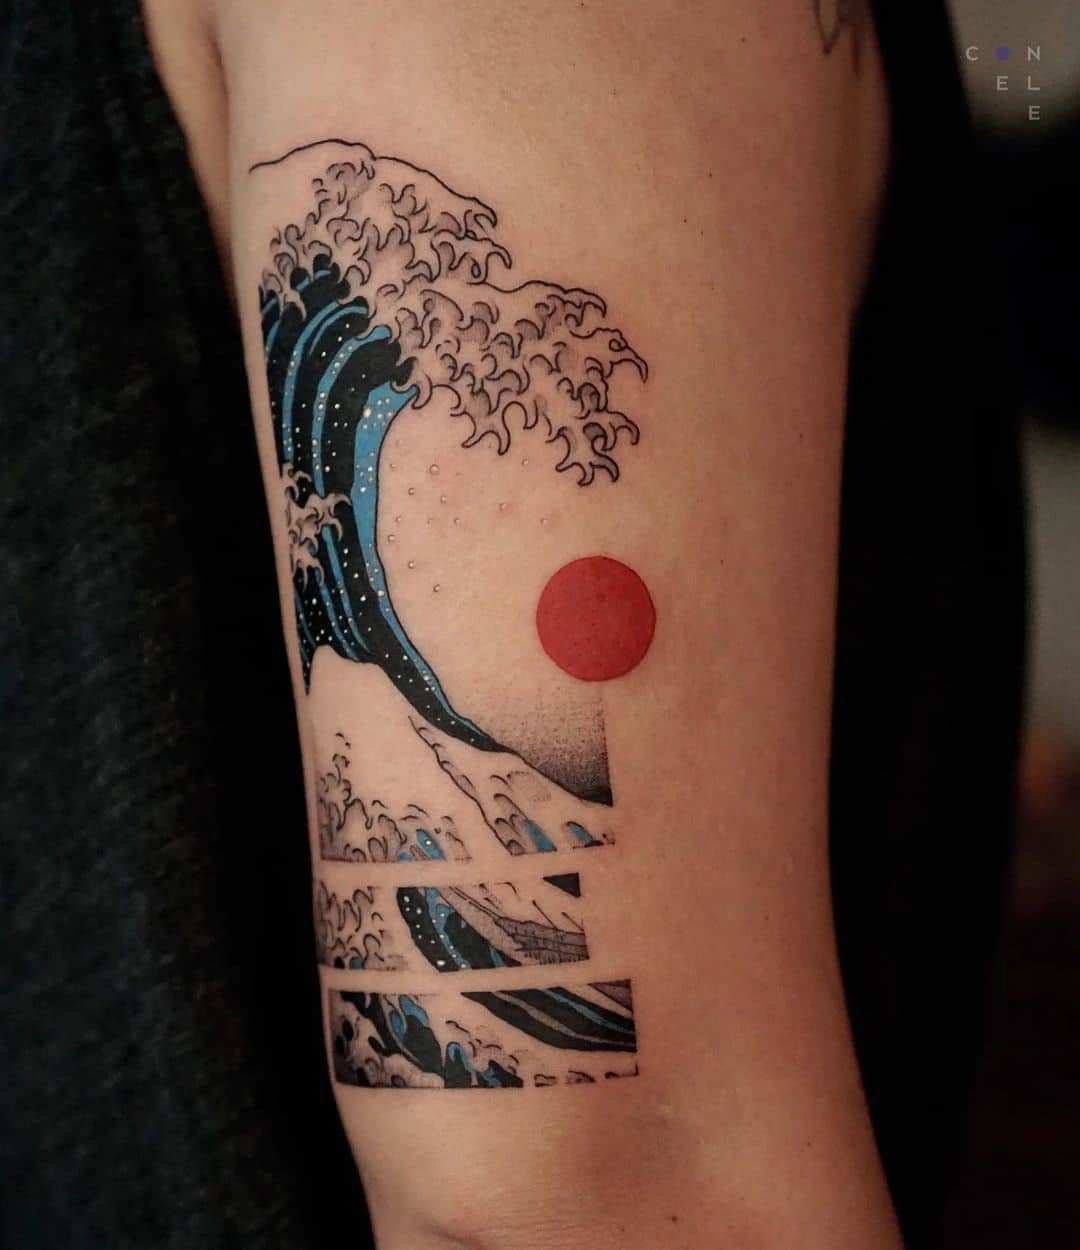 Japanese tattoos [The Complete Guide] +100 Tattoos